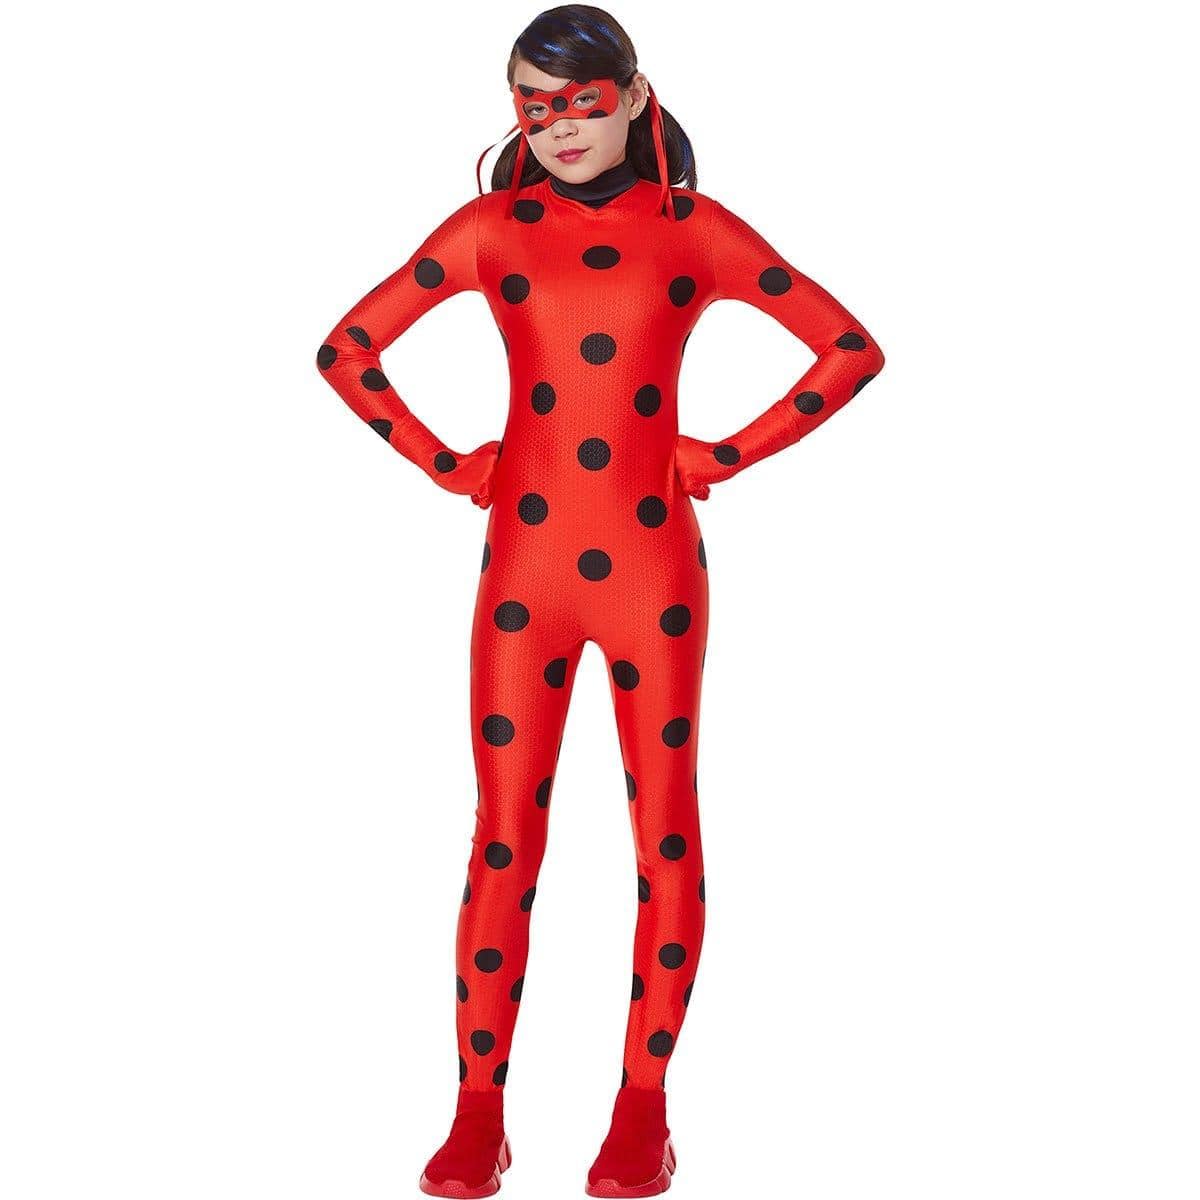 Buy Costumes Ladybug Classic Costume for Kids, Miraculous: Tales of Ladybug & Cat Noir sold at Party Expert